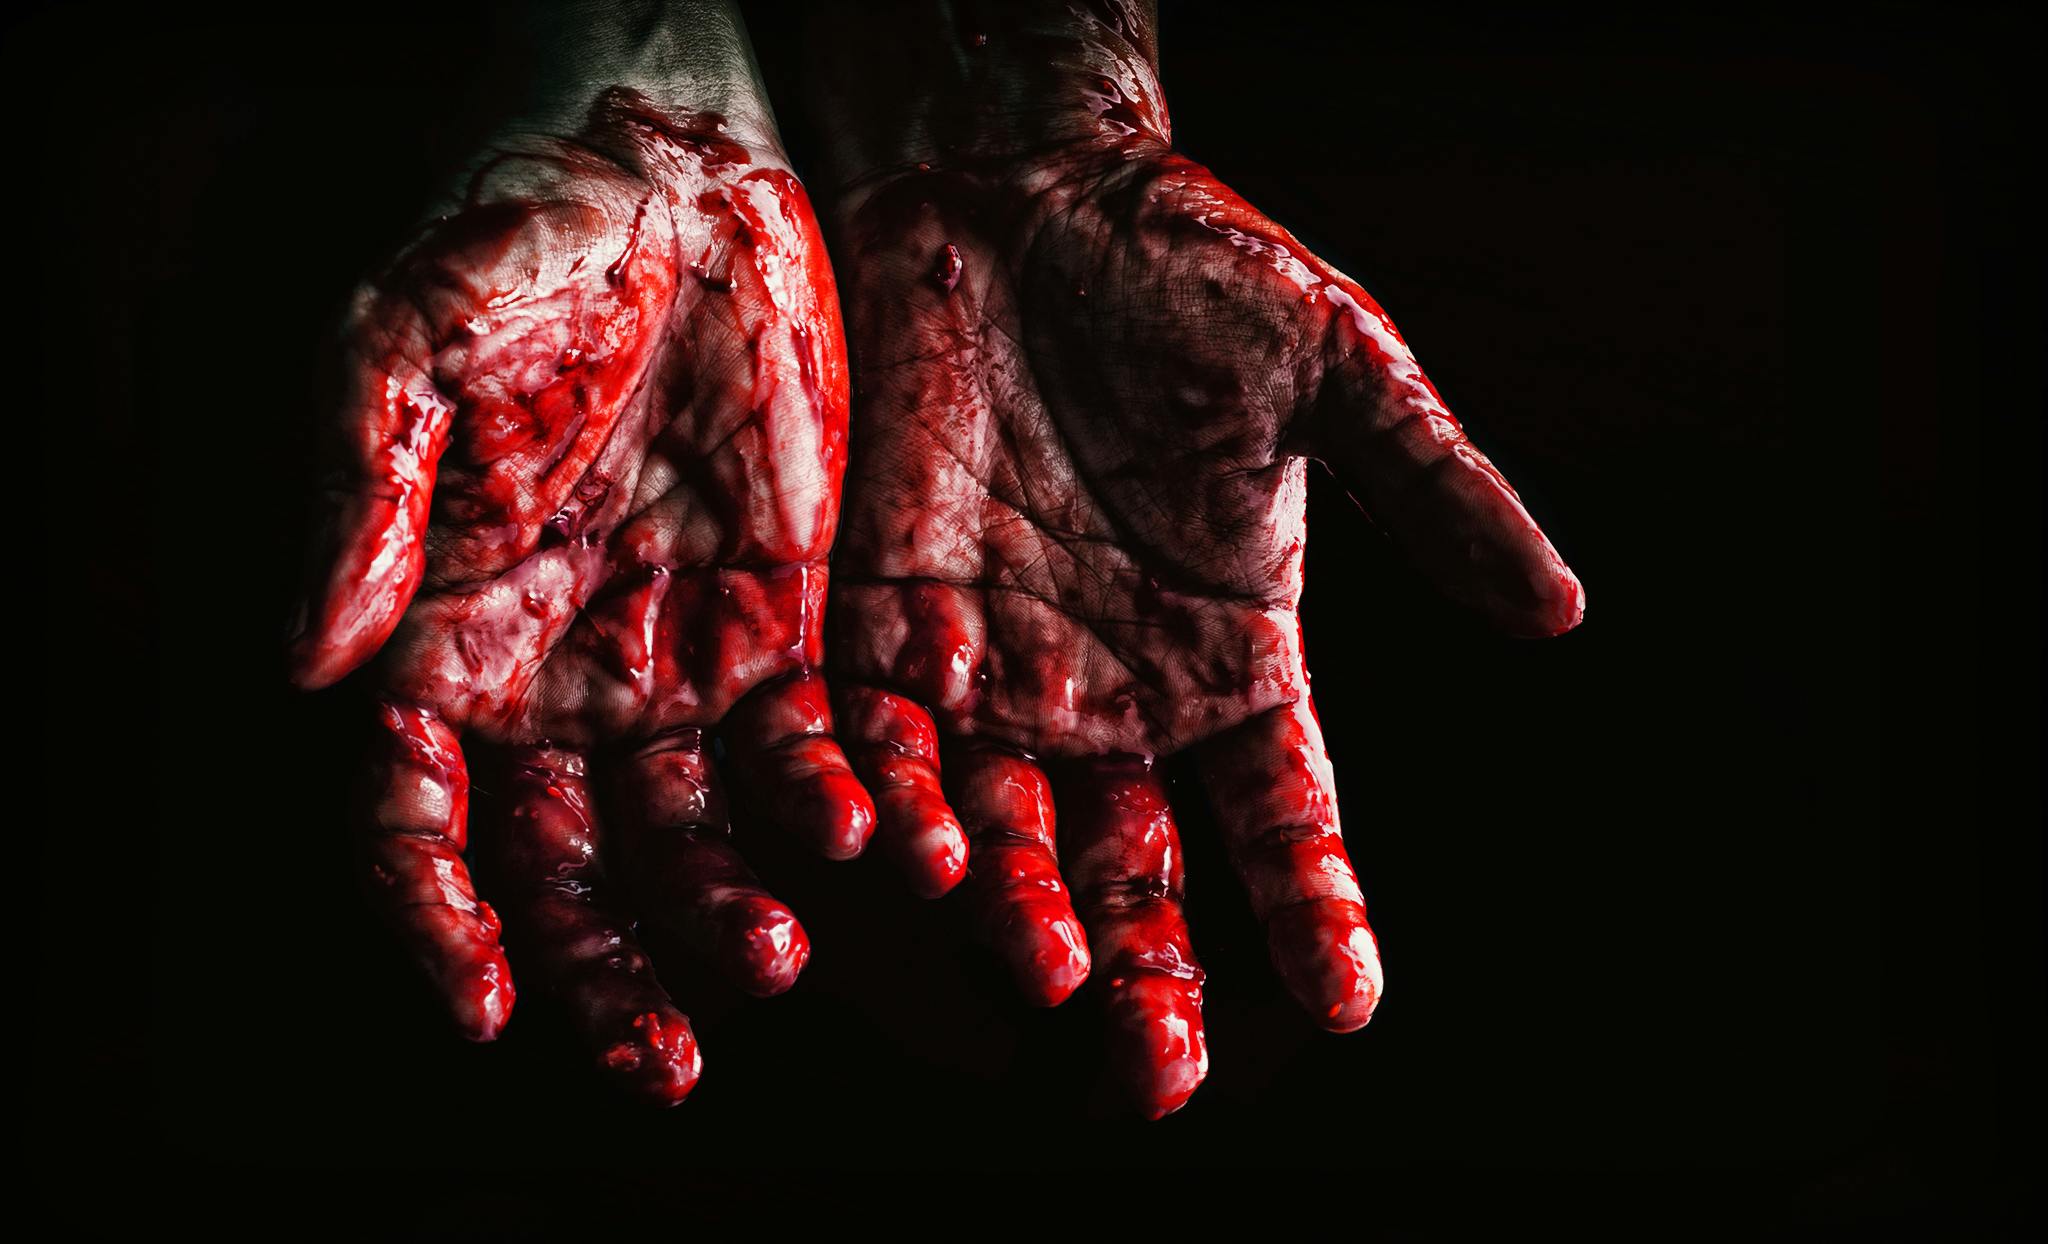 a close up of a person's hands covered in blood, an album cover, pexels contest winner, hyperrealism, dark, let's get dangerous, cracked, on a dark background